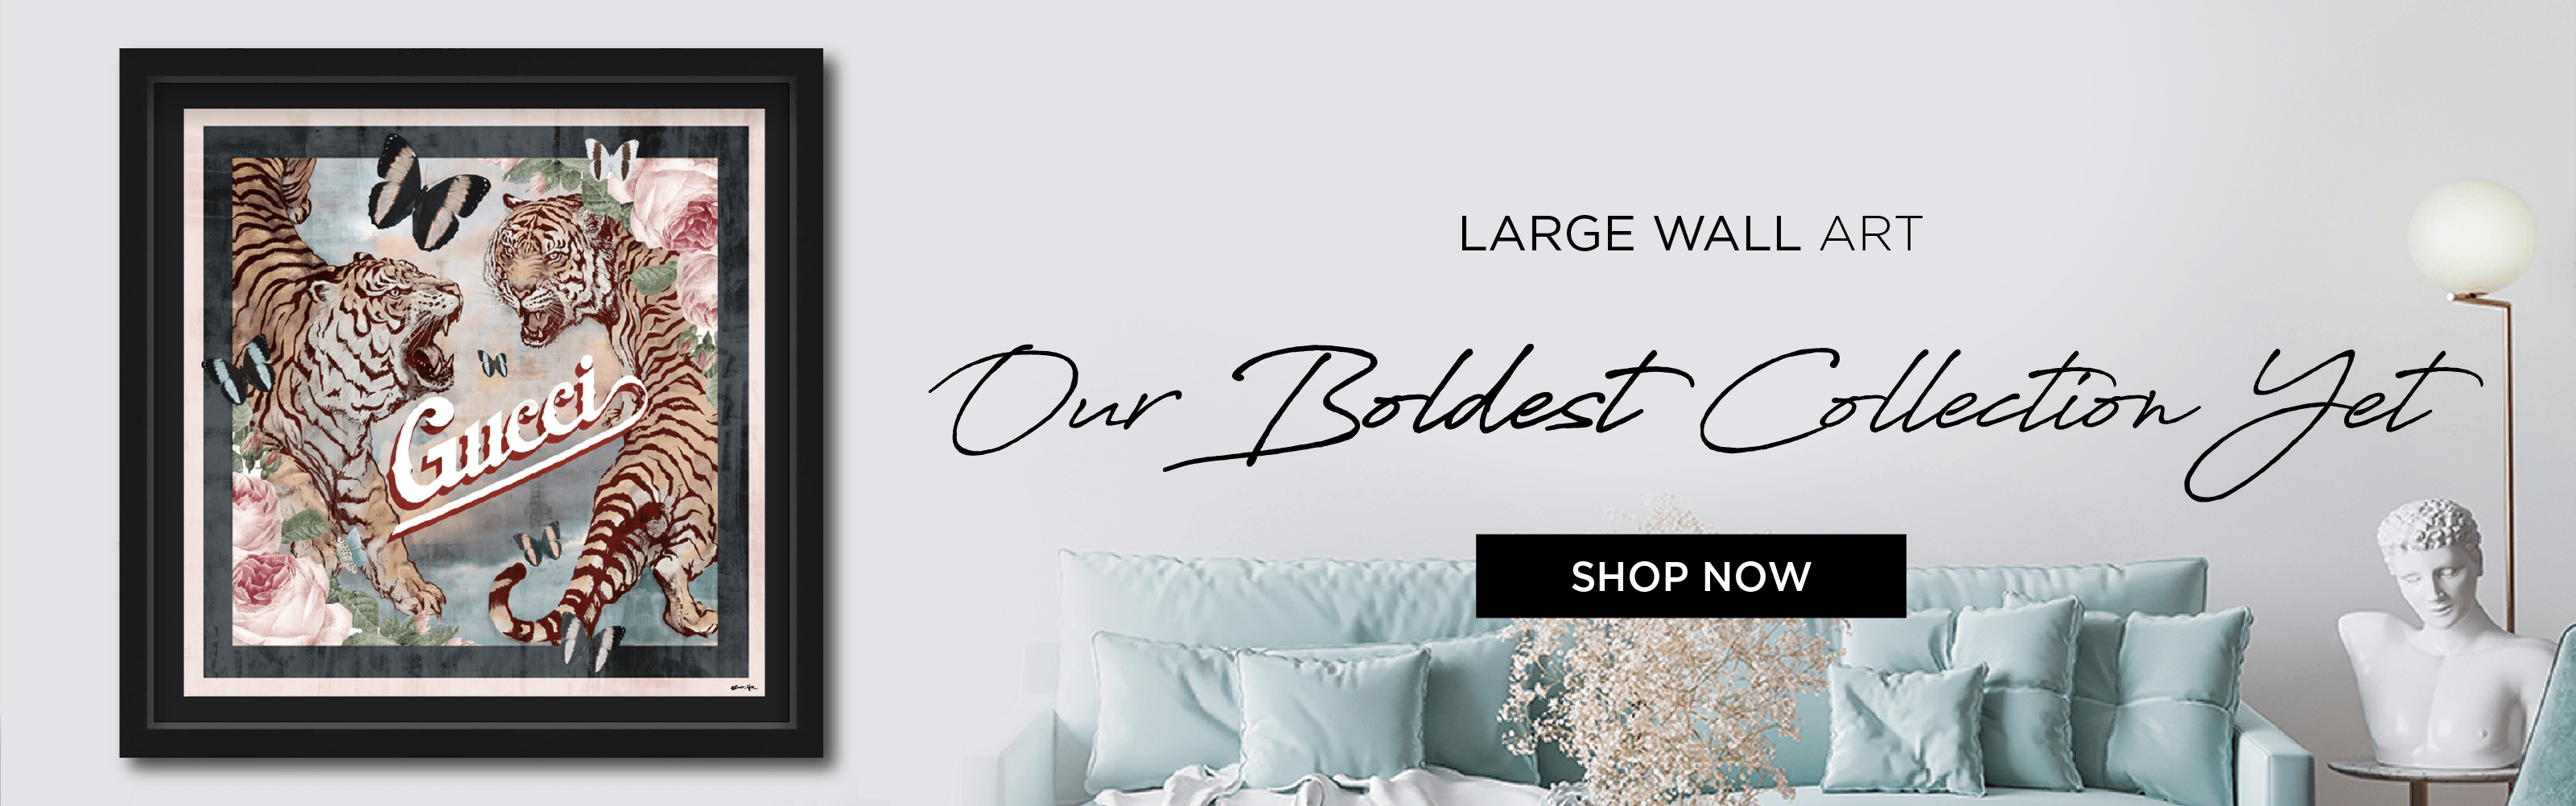 Large Wall Art - Shop Now